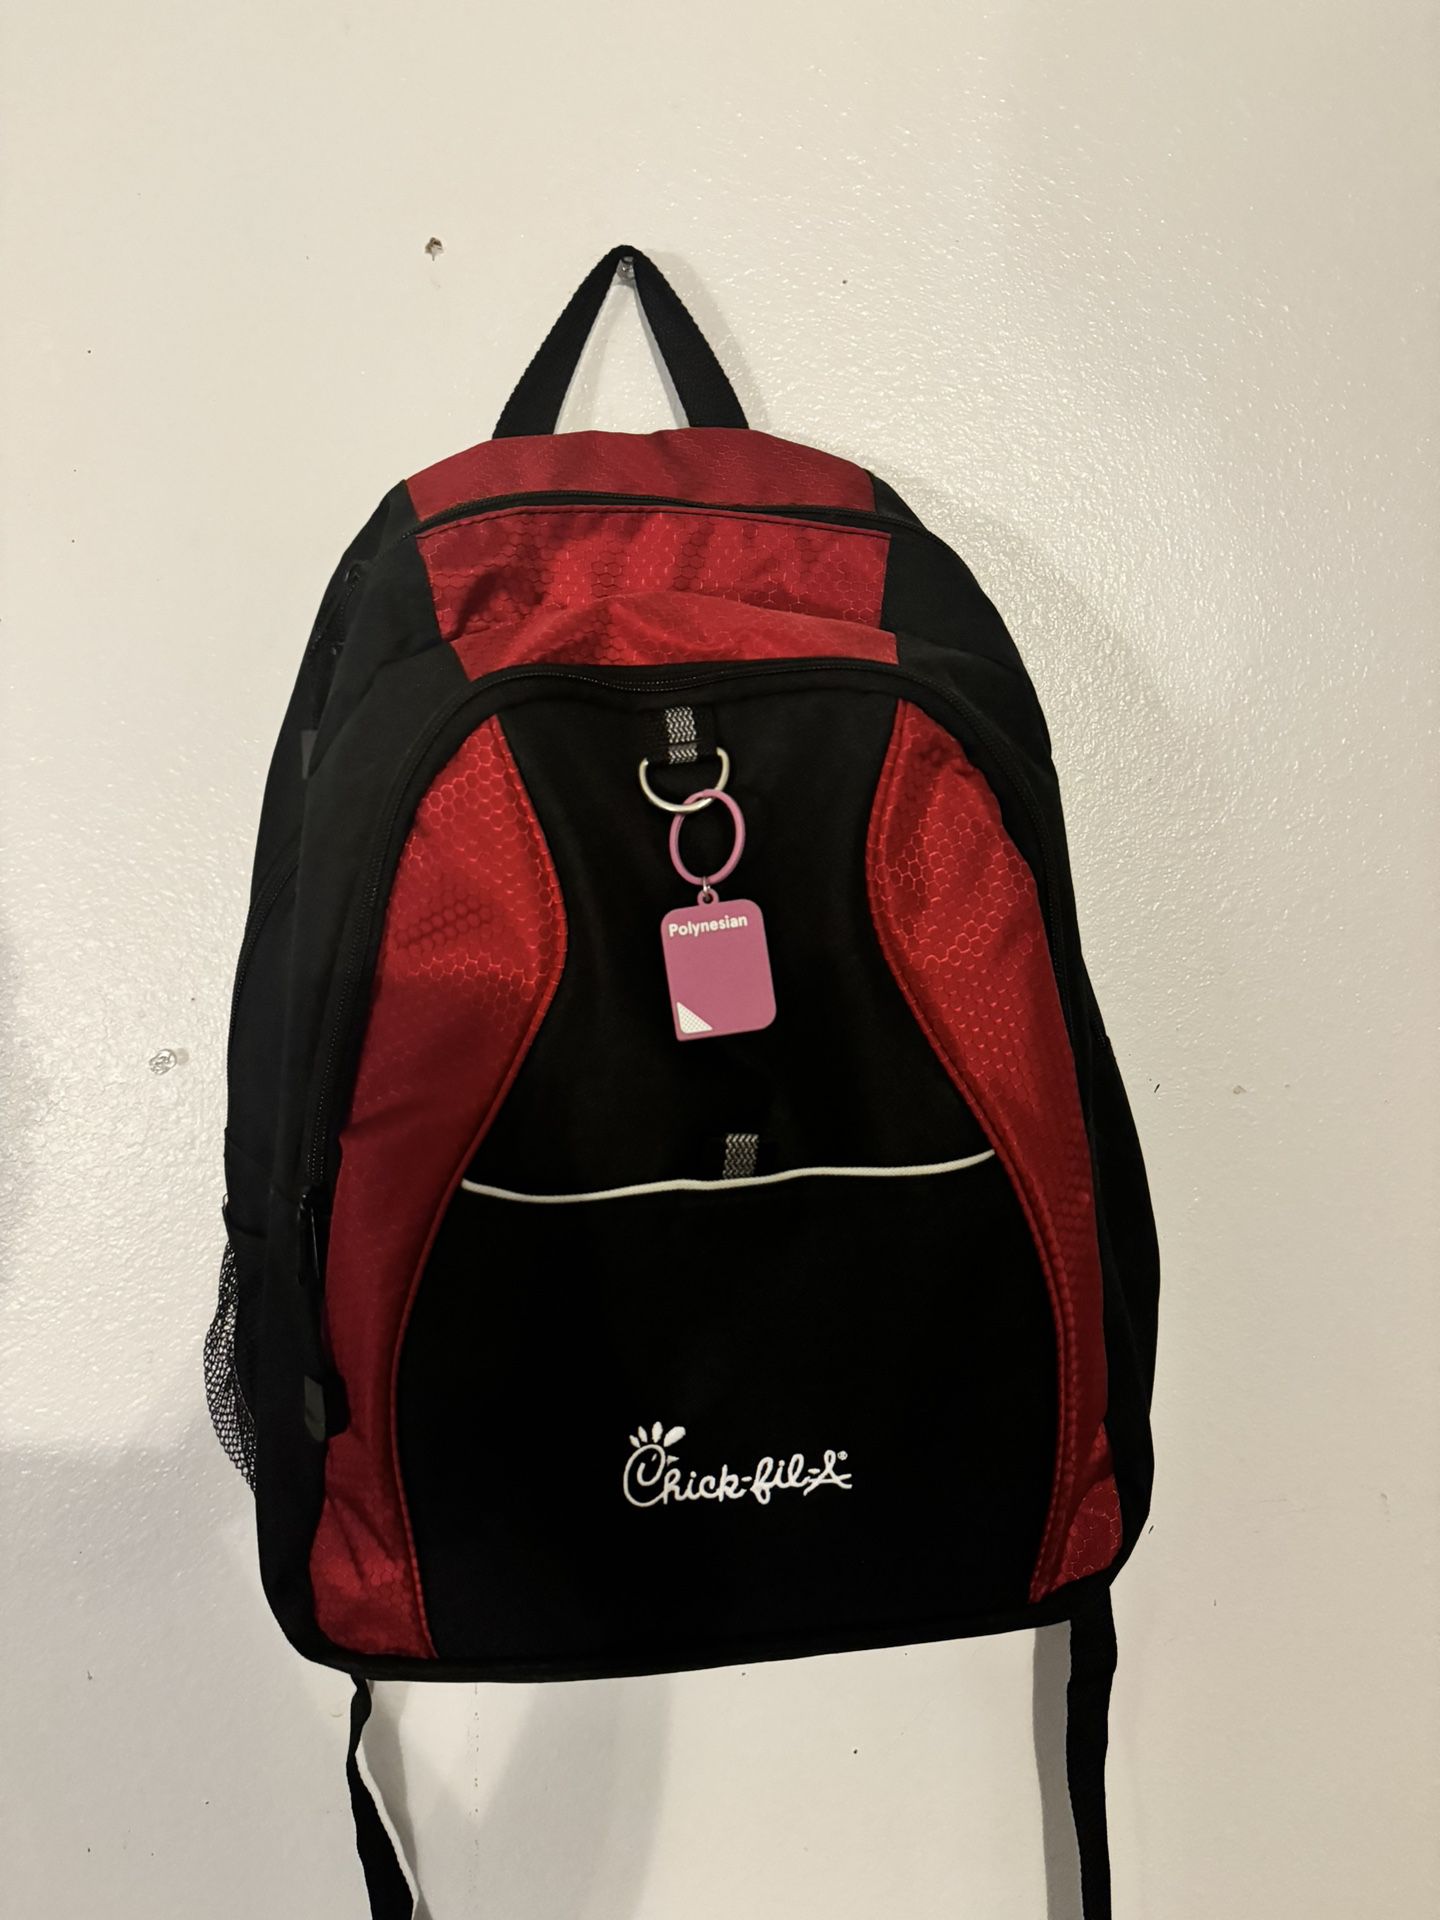 Chick Fil A Backpack 